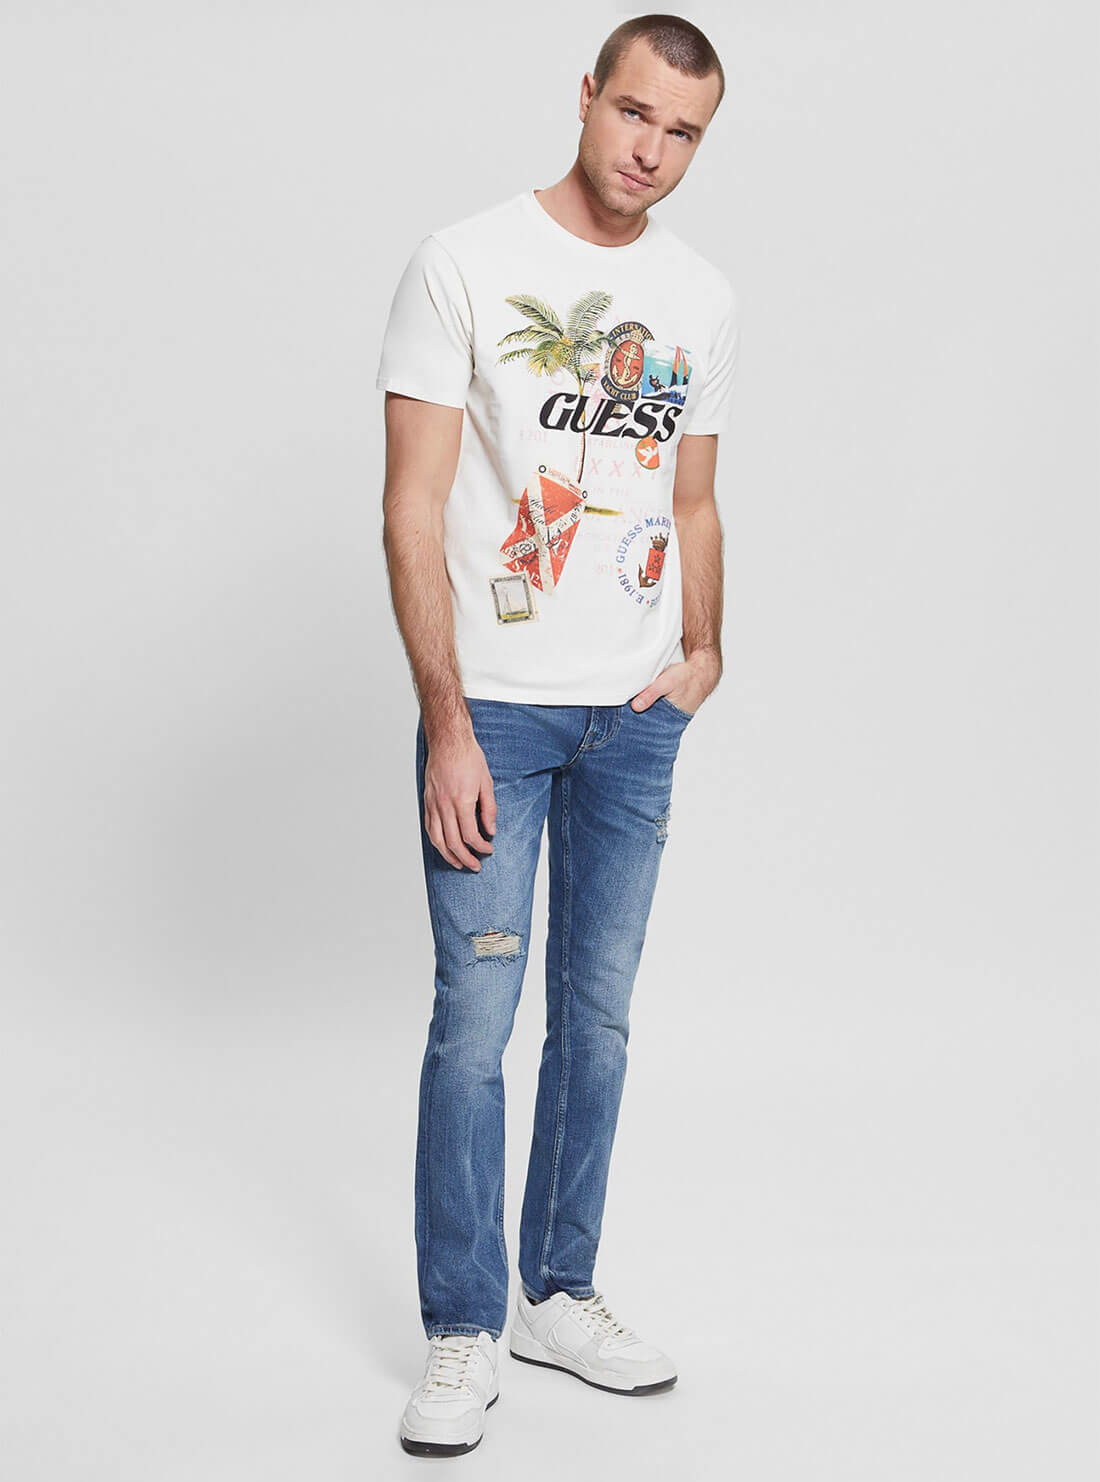 White Nautical Collage Graphic T-Shirt | GUESS Men's Apparel | full view